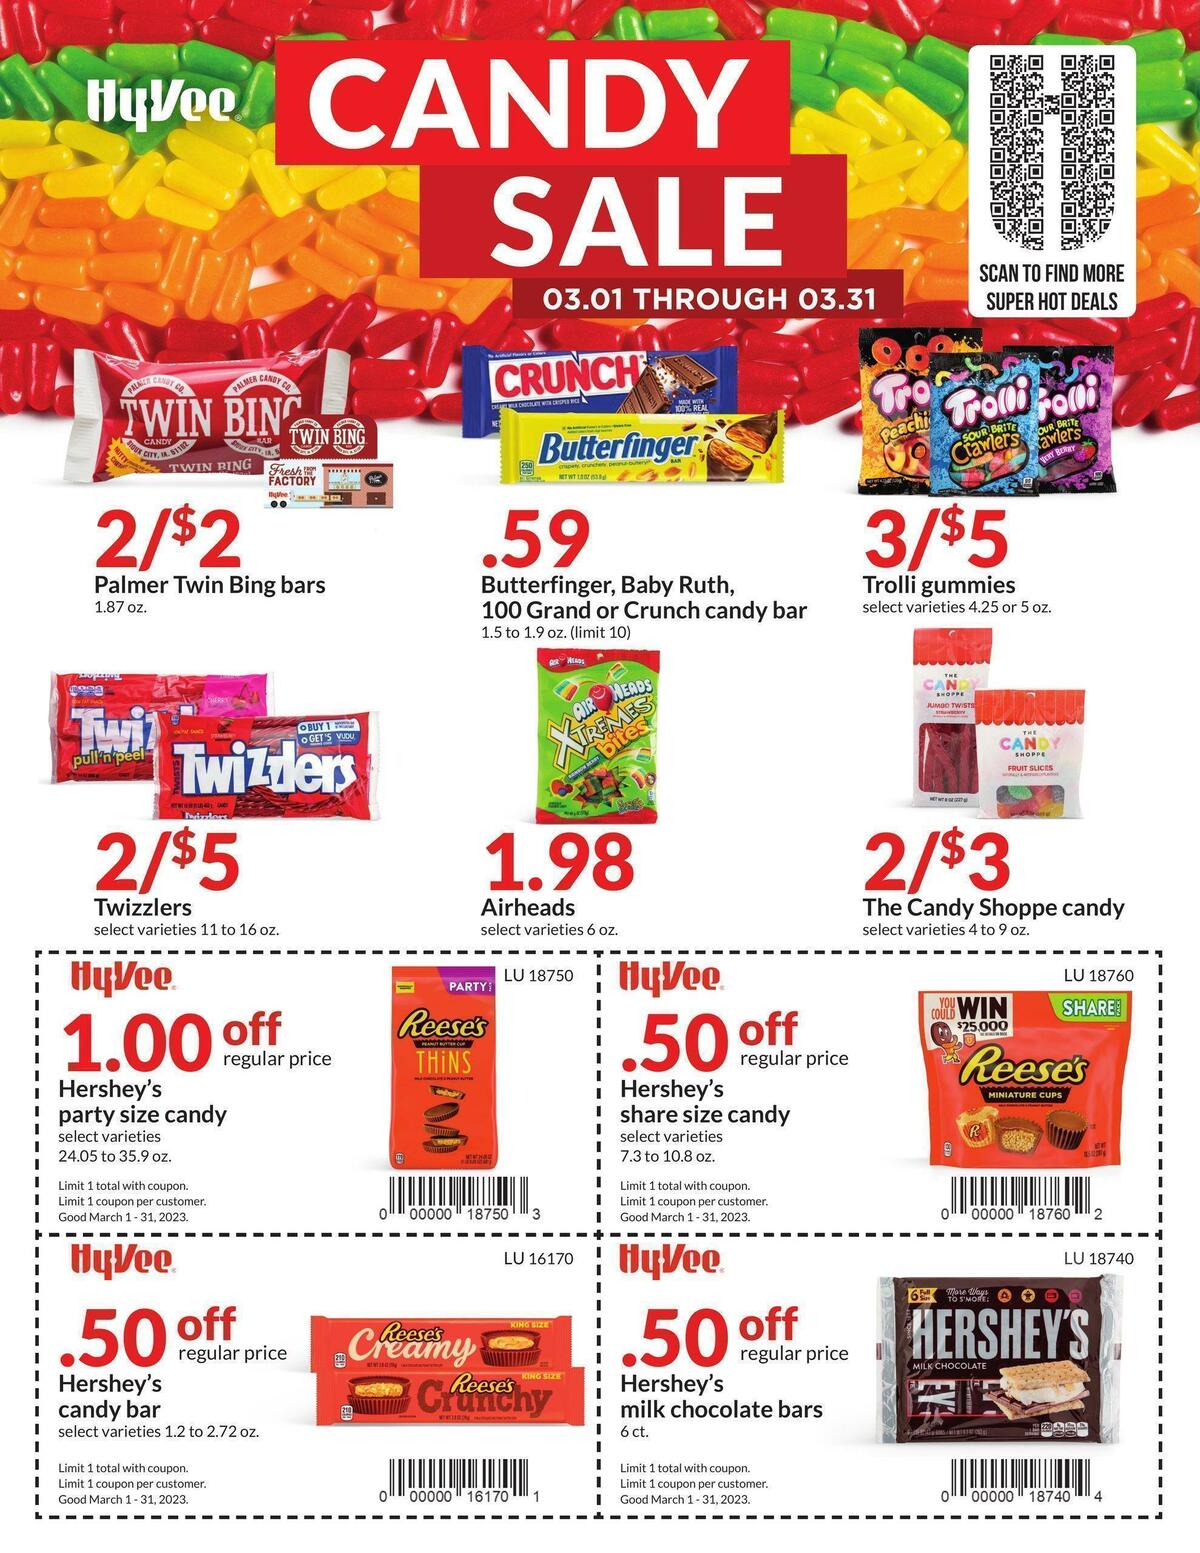 Hy-Vee Candy Sale Weekly Ad from March 1